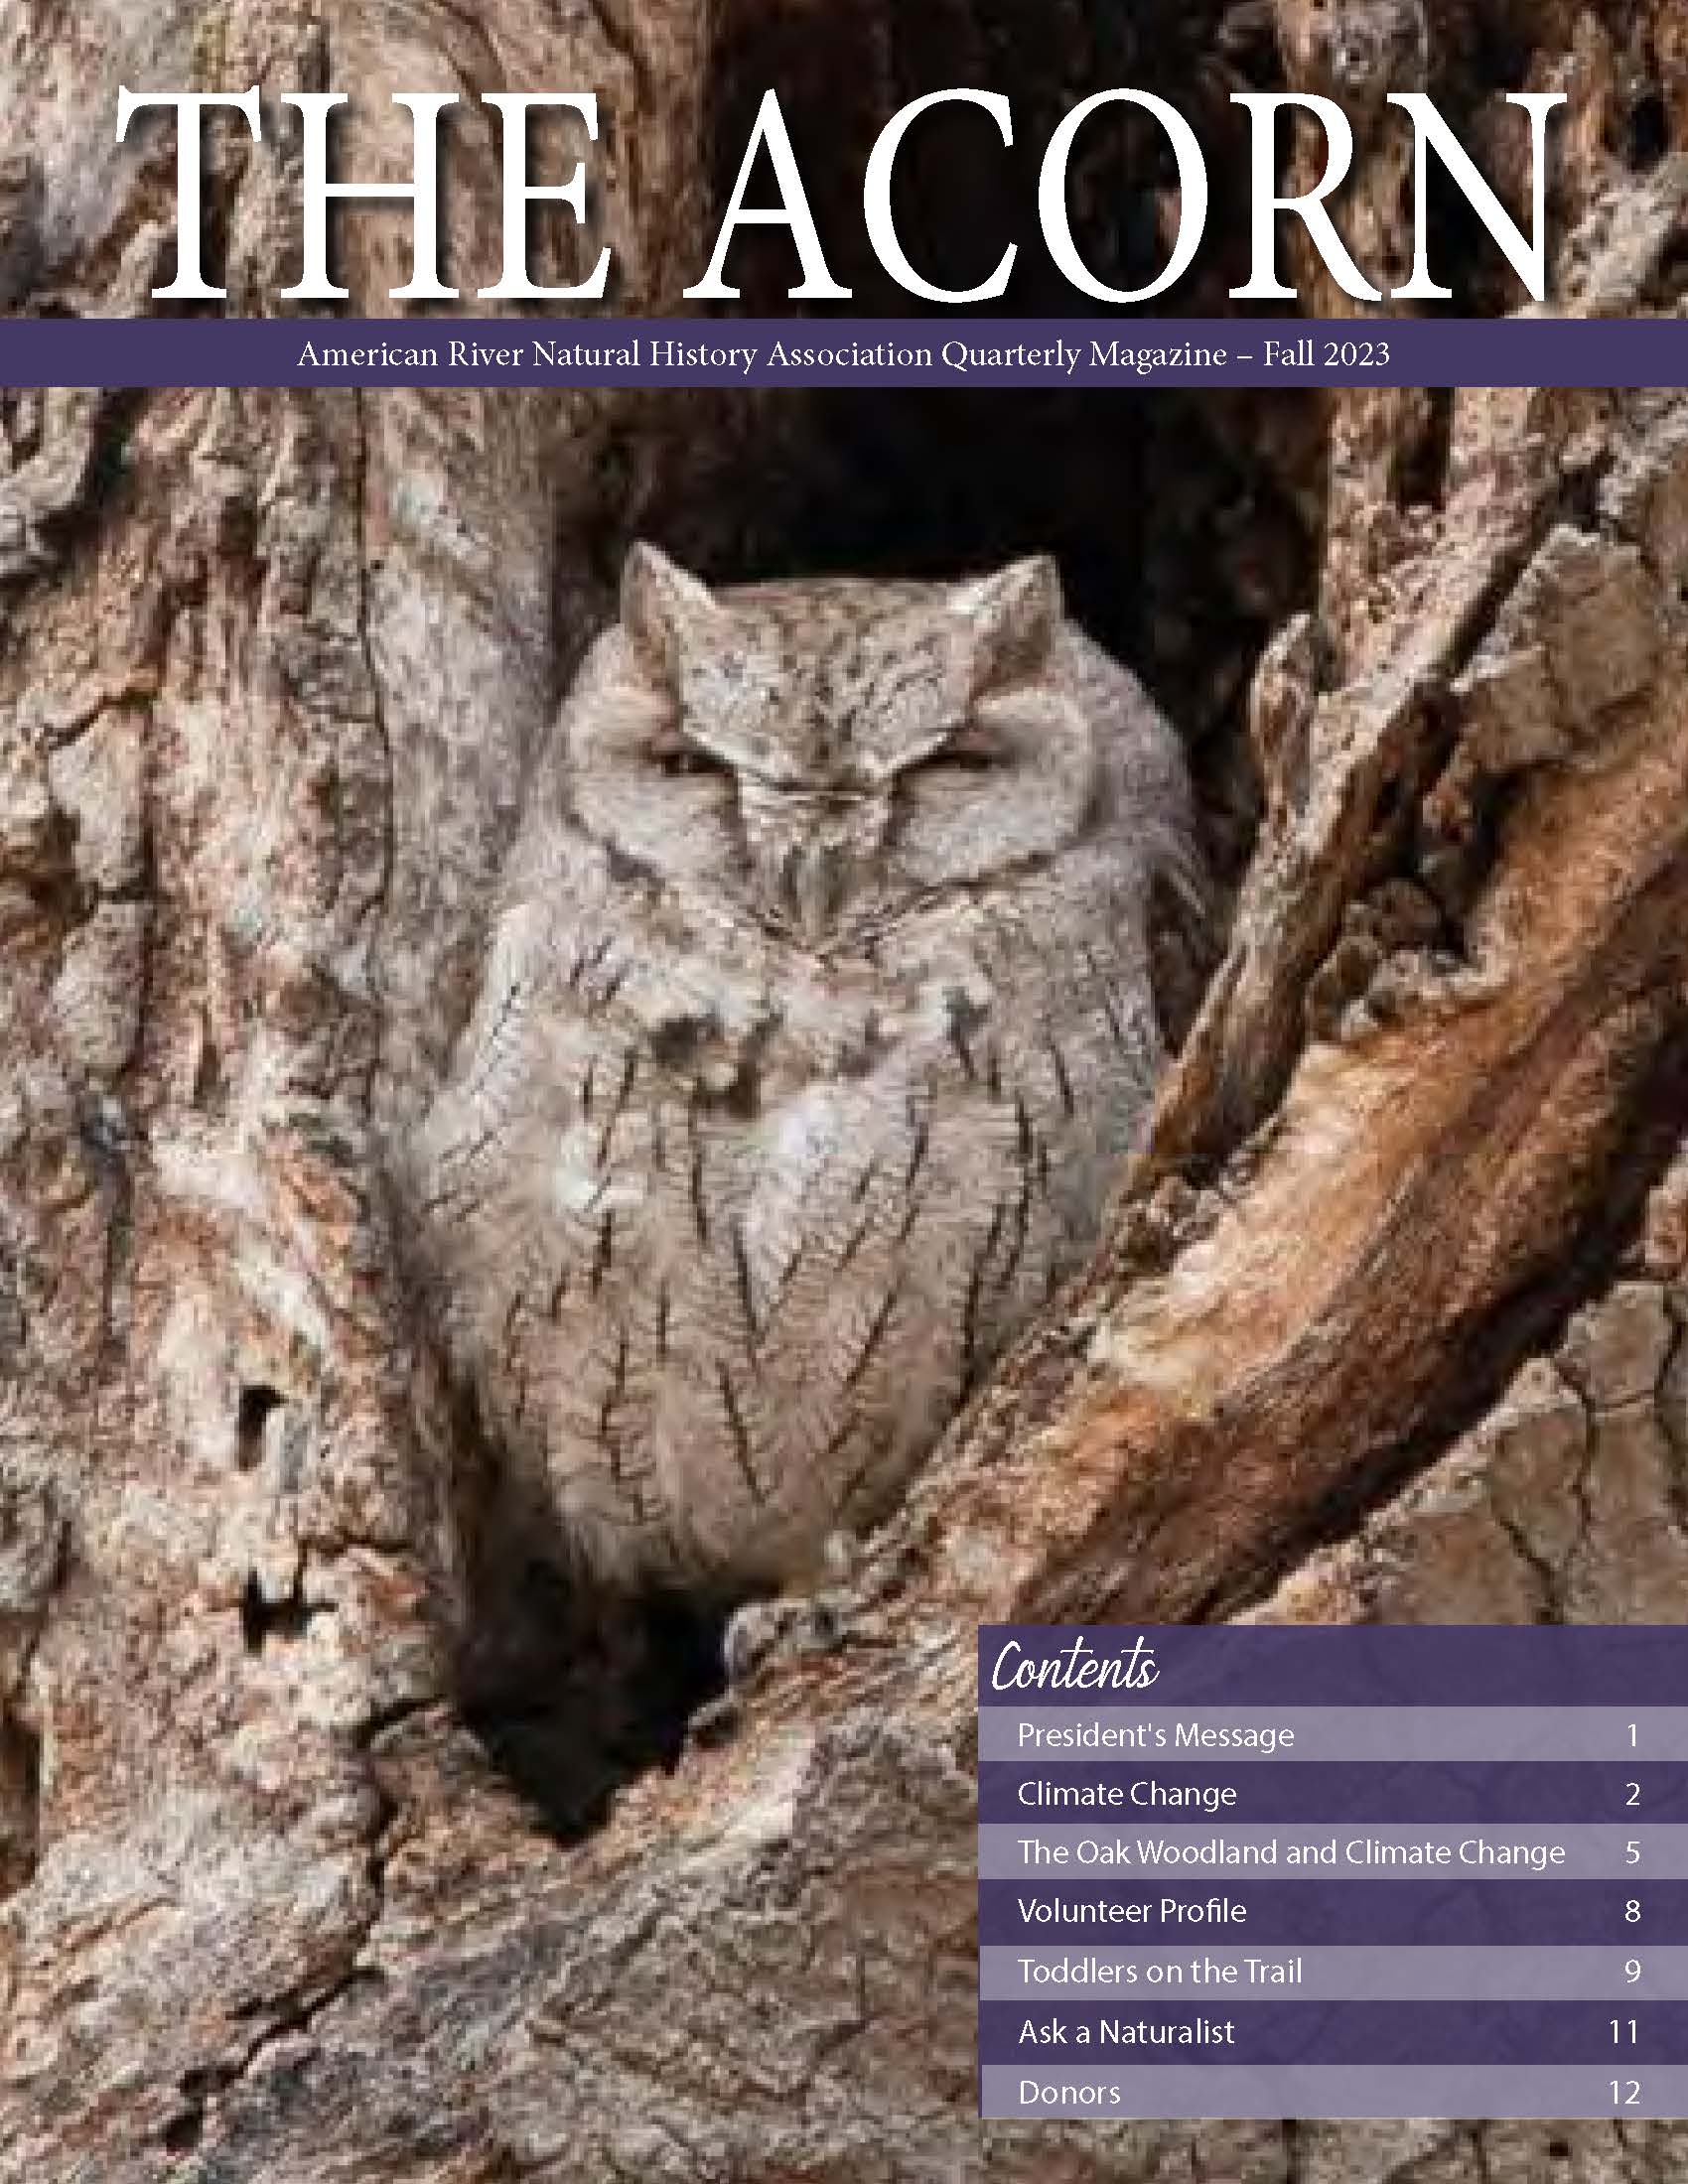 Magazine Cover of The ACORN: Winter 2021 issue